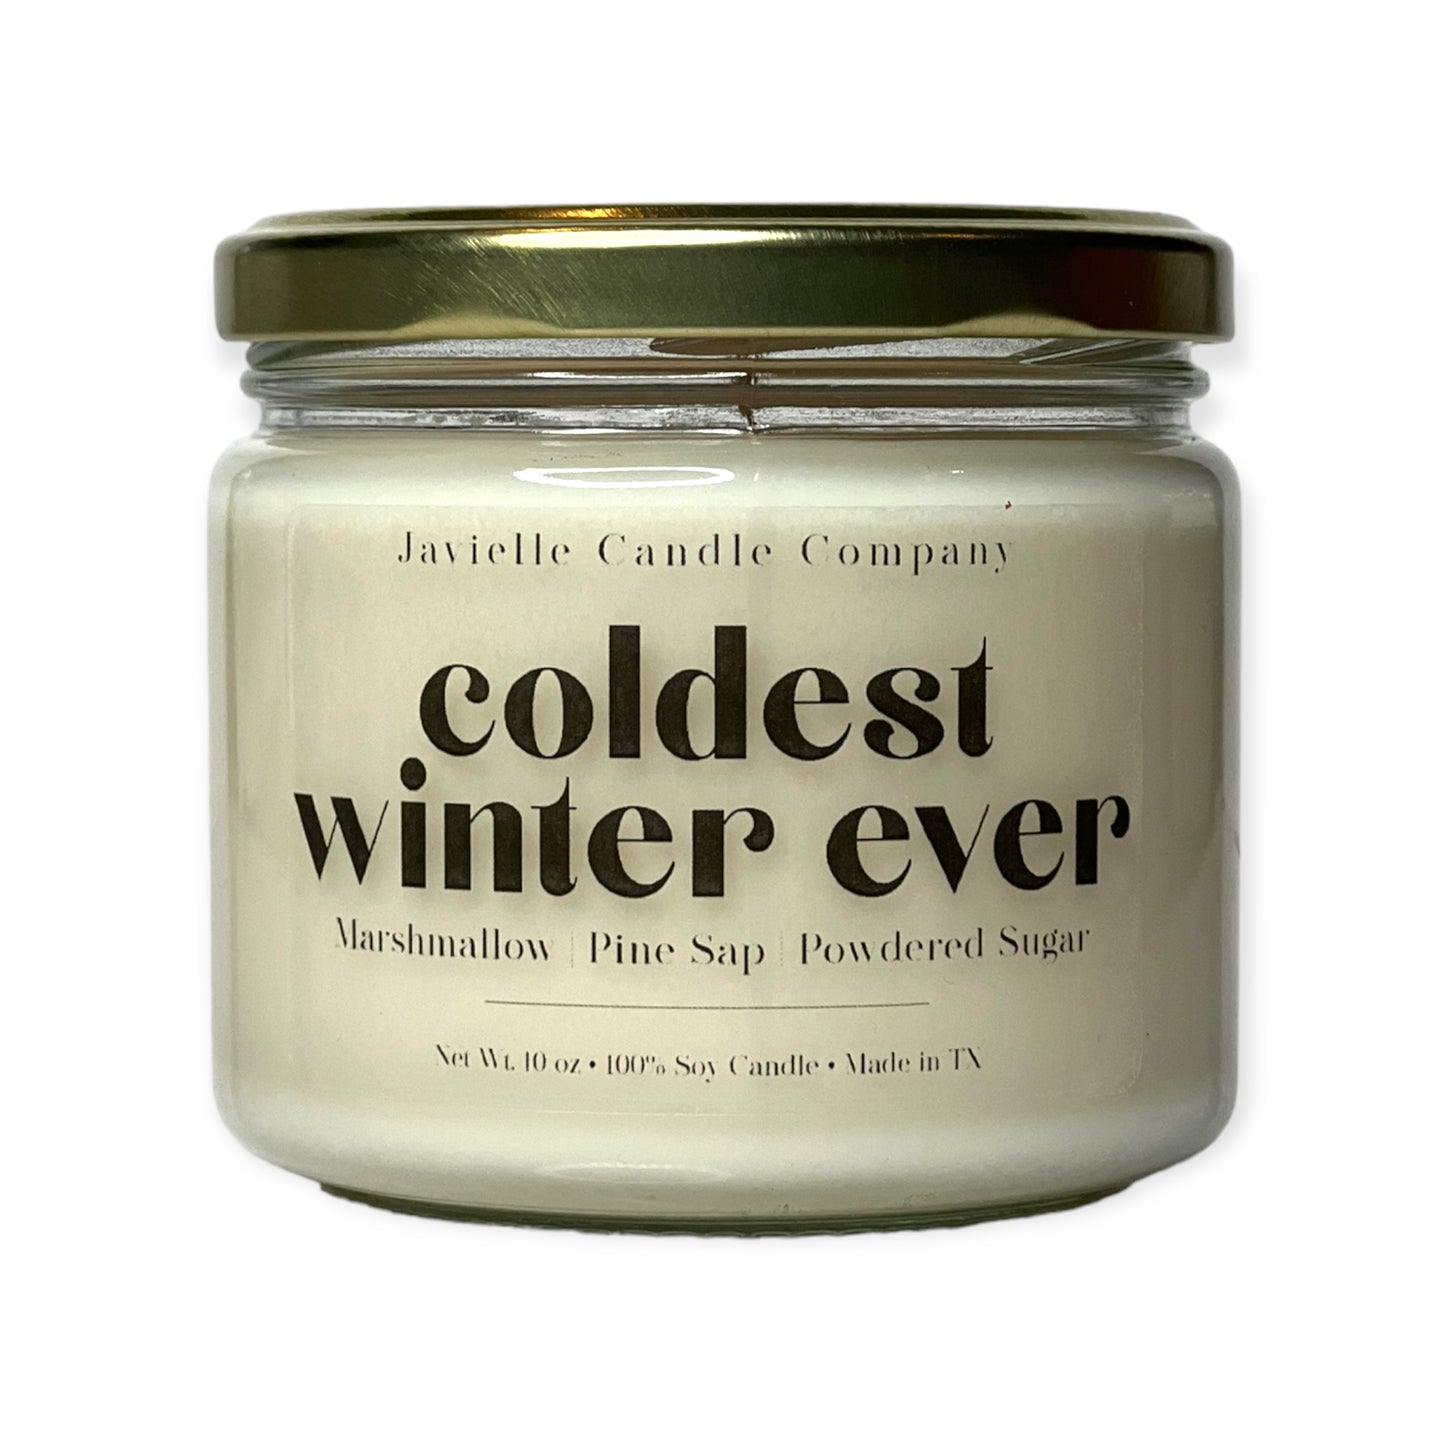 Coldest Winter Ever Soy Candle